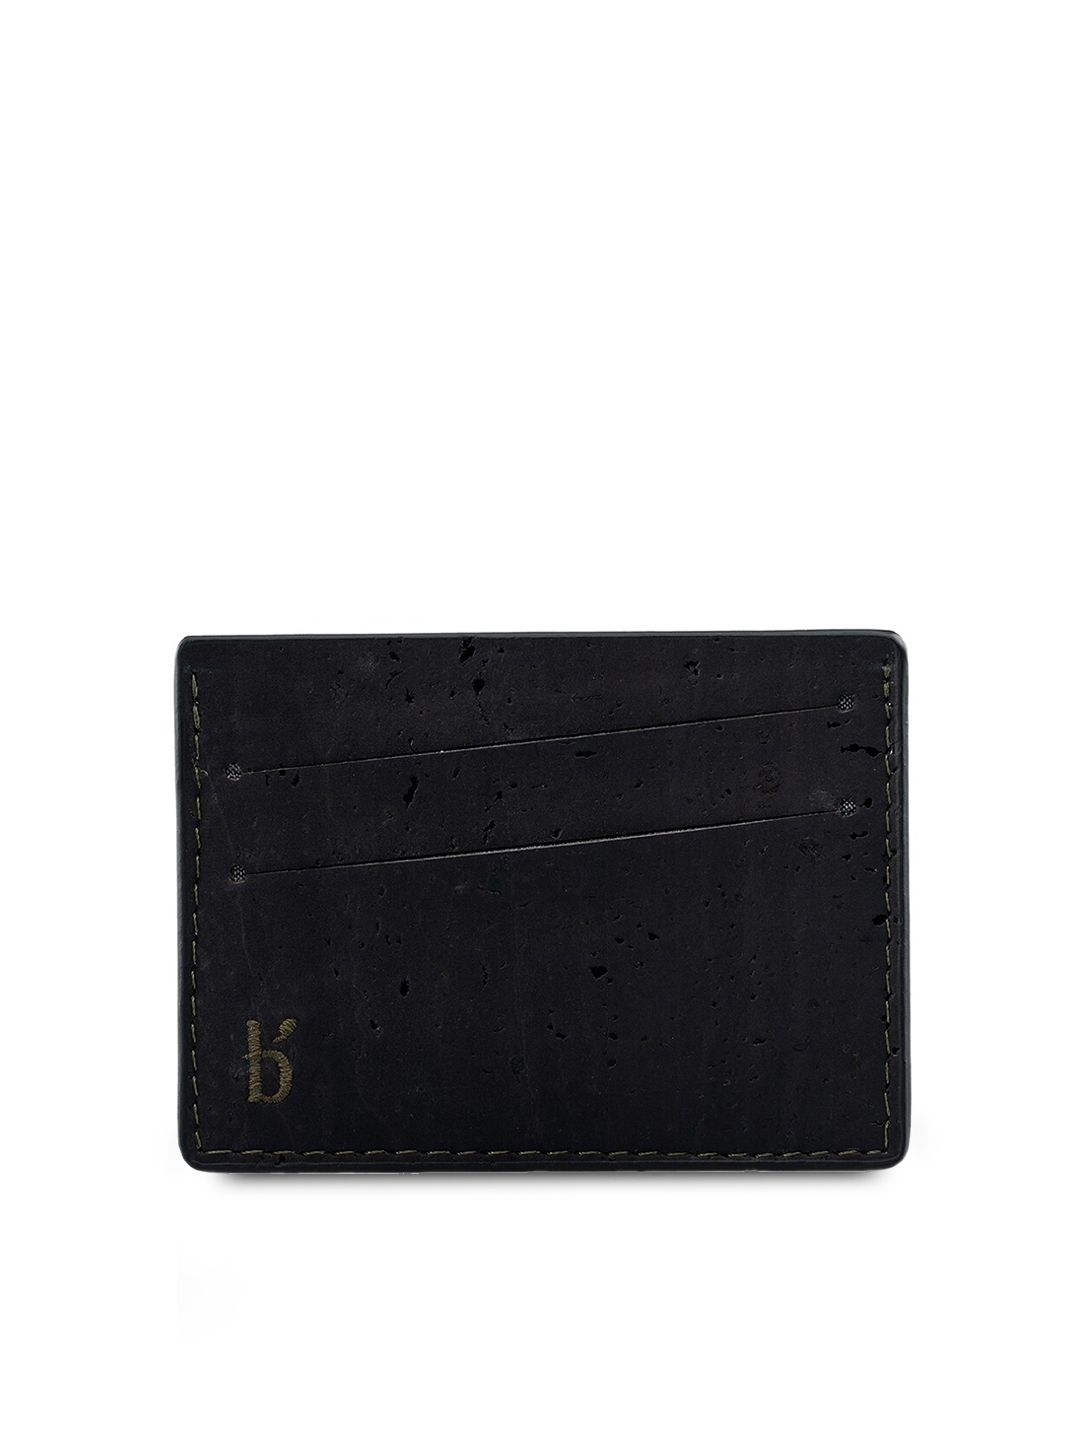 Beej Unisex Green & Black Textured Sustainable Card Holder Price in India